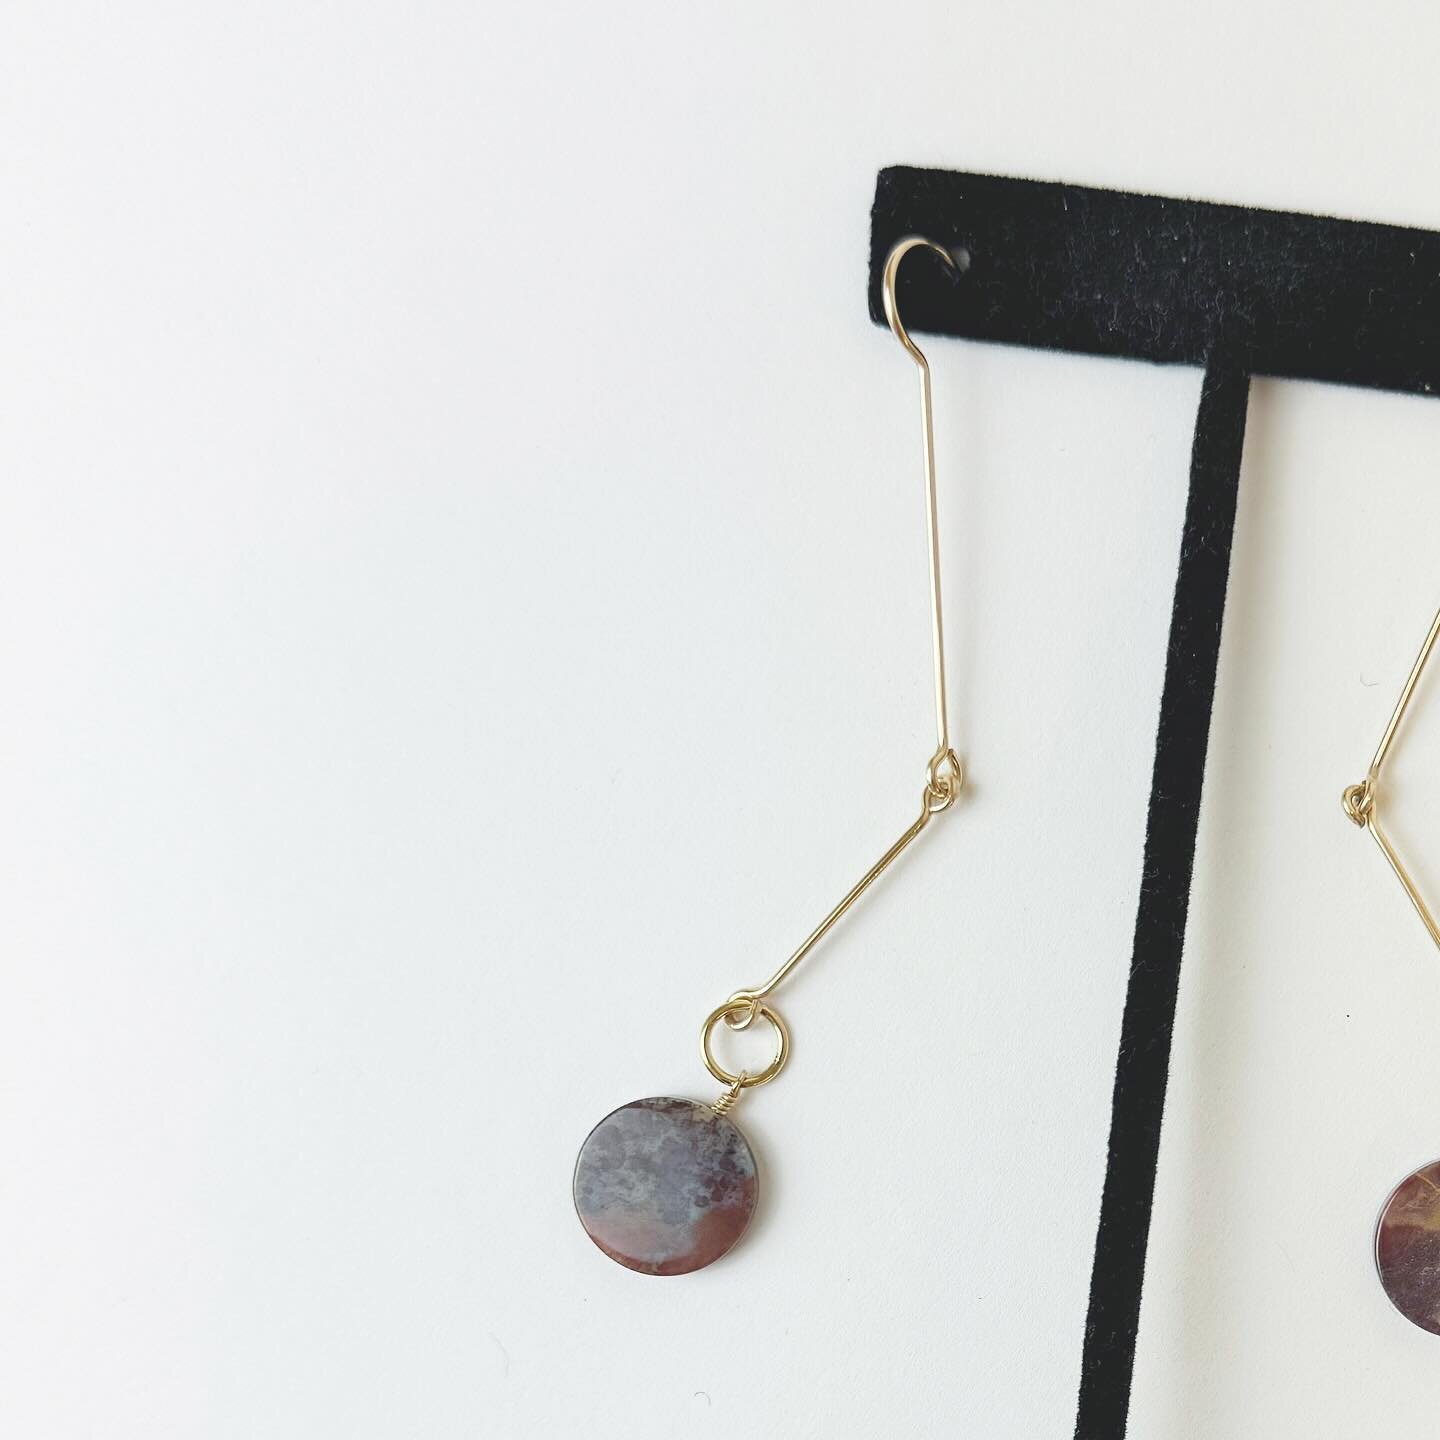 The Mantis Earrings, an elongated play of gold with gently weight punctuation of jasper. 

Details available upon request.